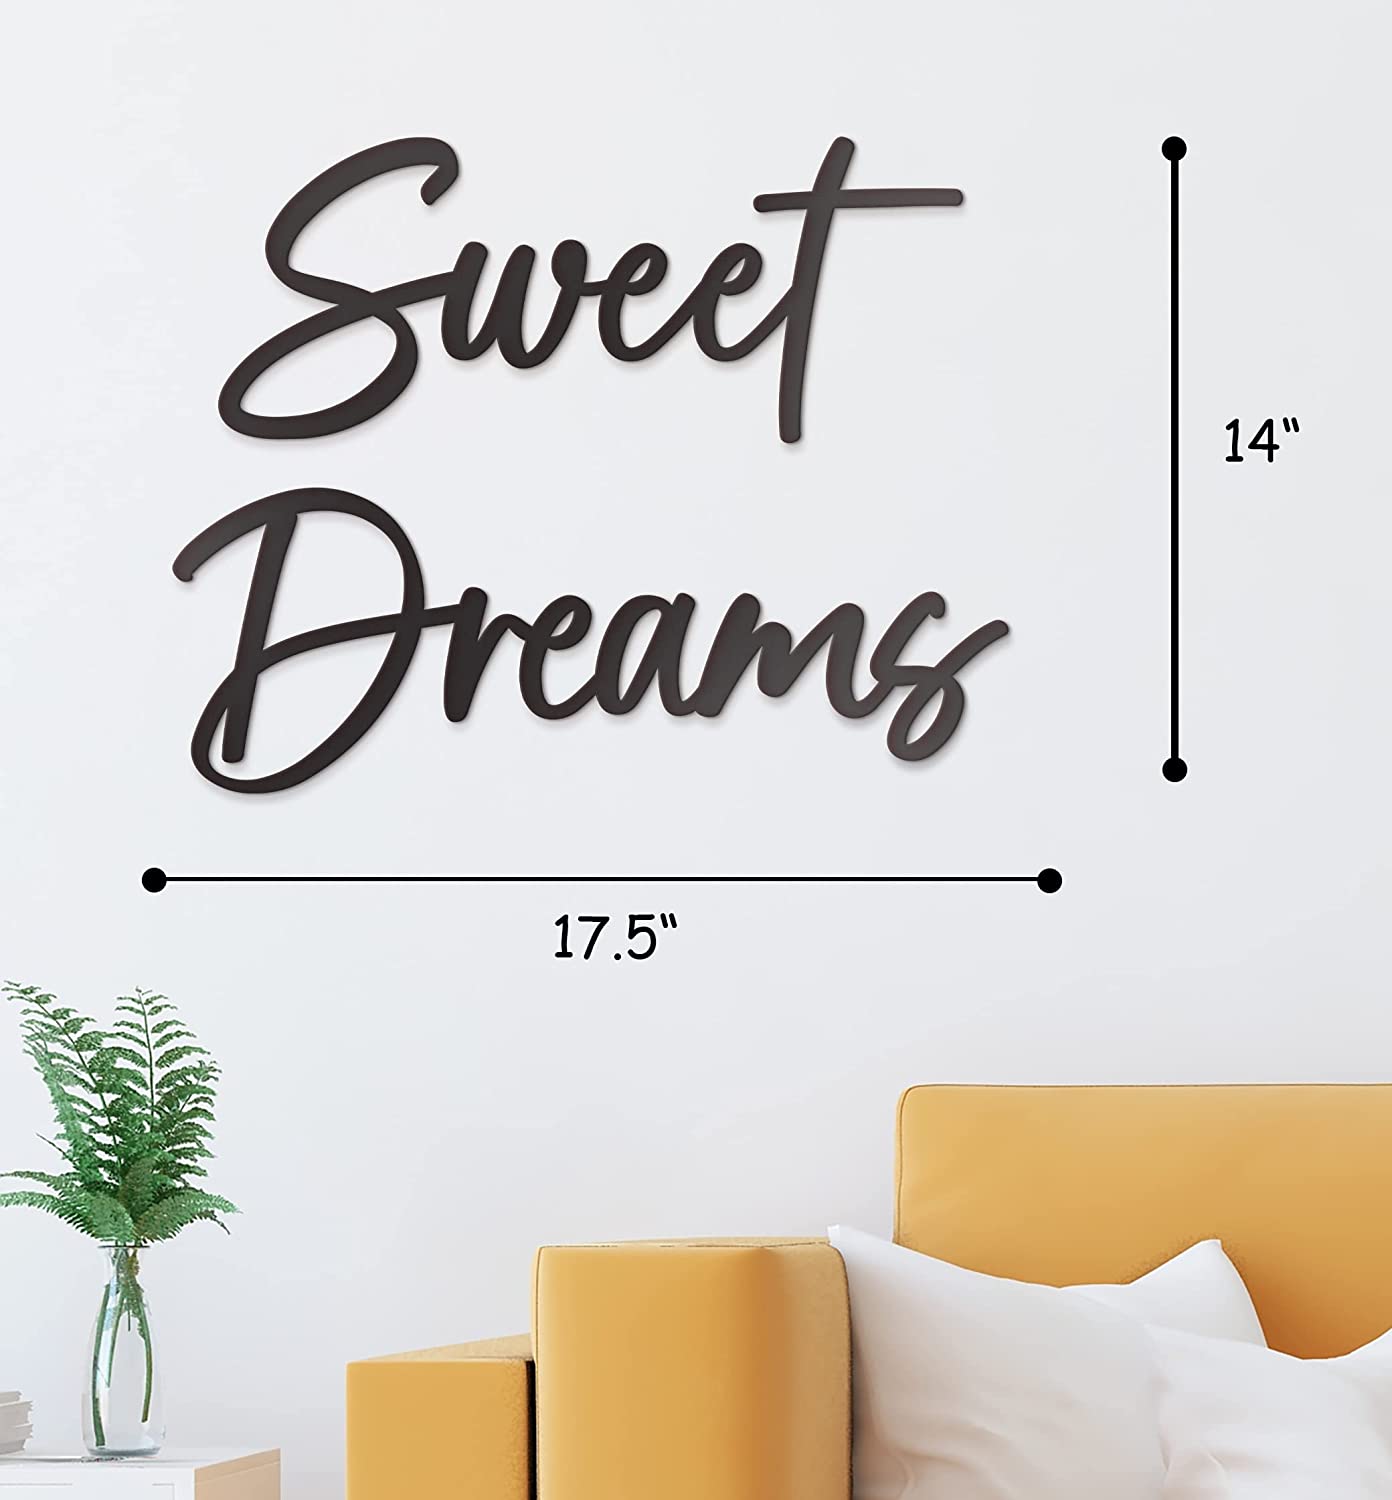 Sweet Dreams Metal Sign Wall Art Decor - 35"X8" Black Modern Sweet Dreams Farmhouse Signs for Hanging Above Bed Wall Decor for Bedroom